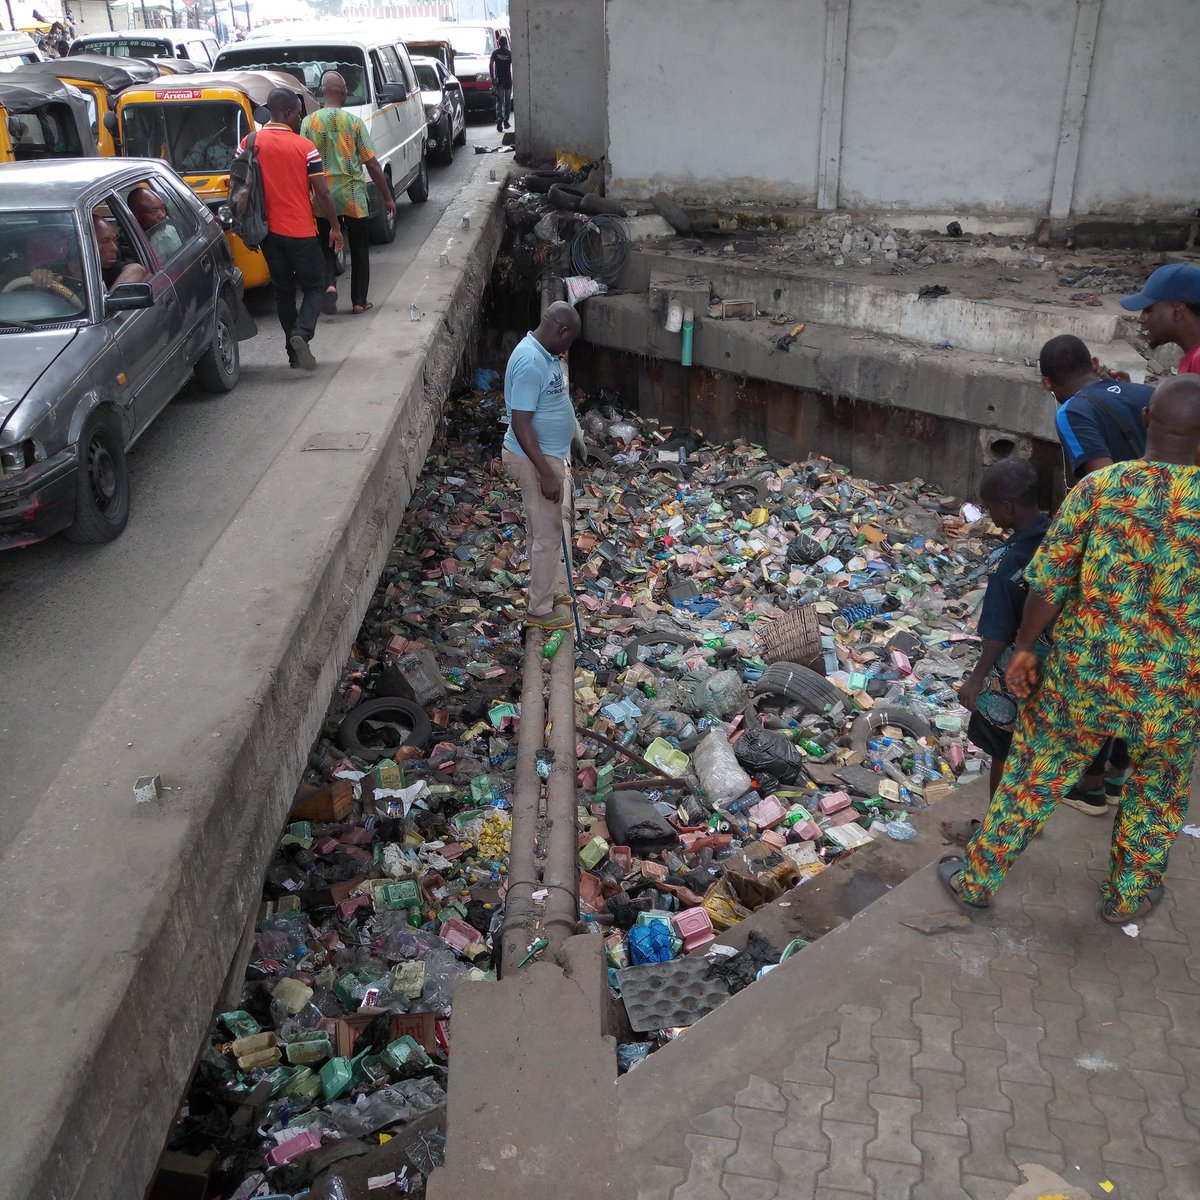 At Obalende for a #Cleanerenvironment